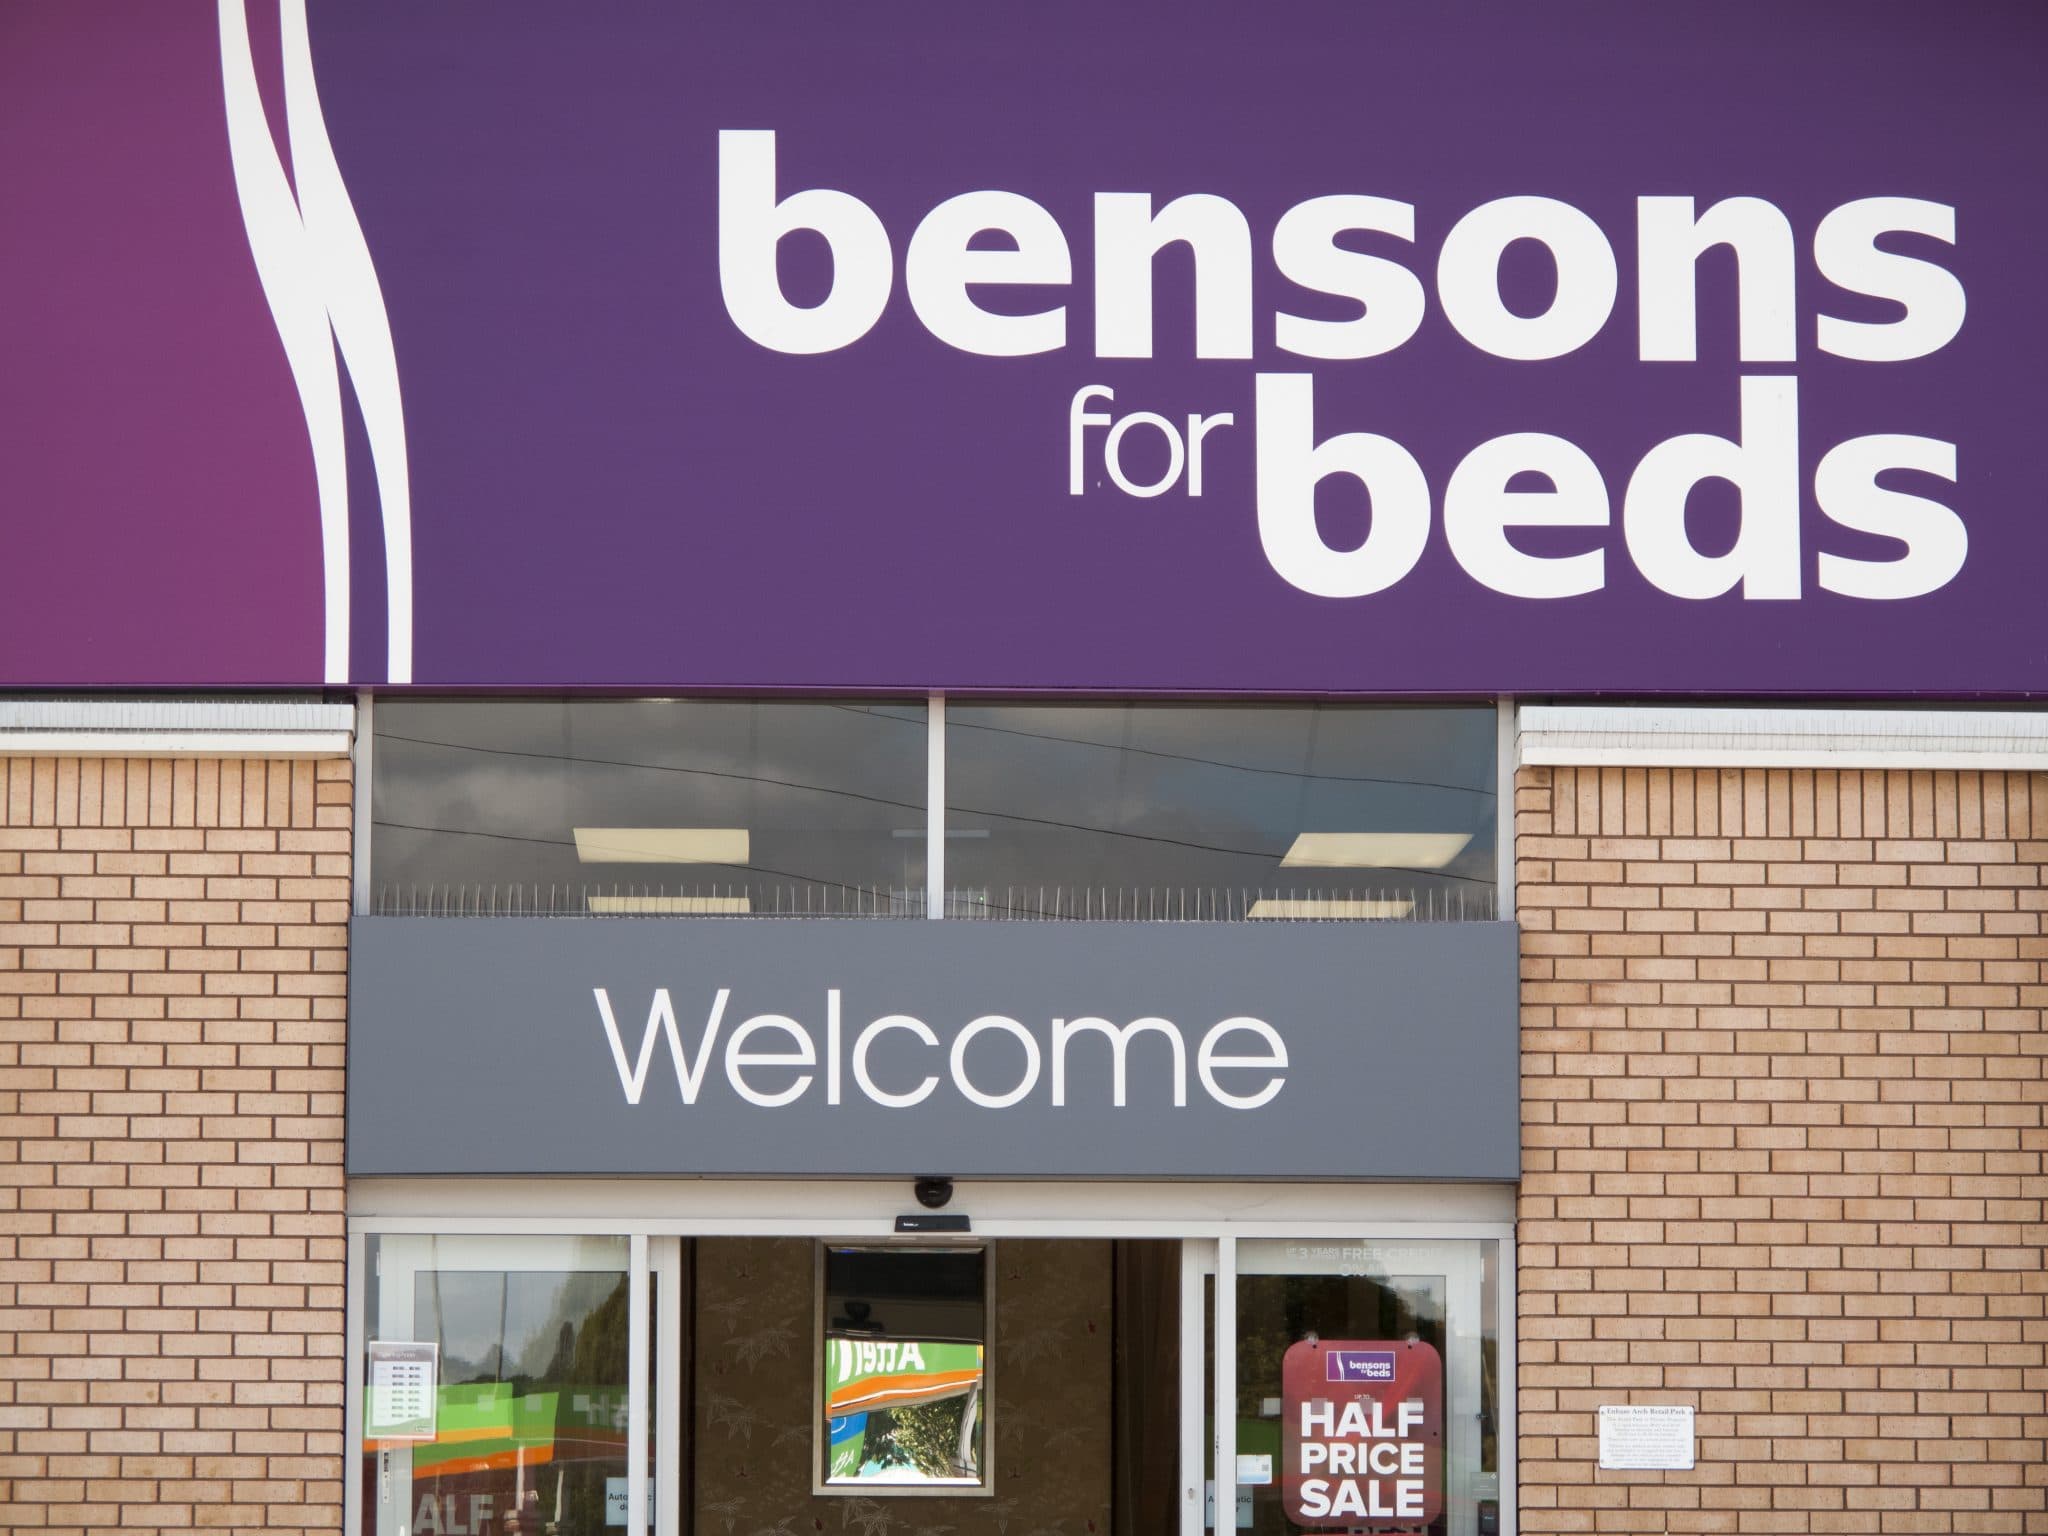 Bensons for Beds & Harveys are no longer owned by Steinhoff